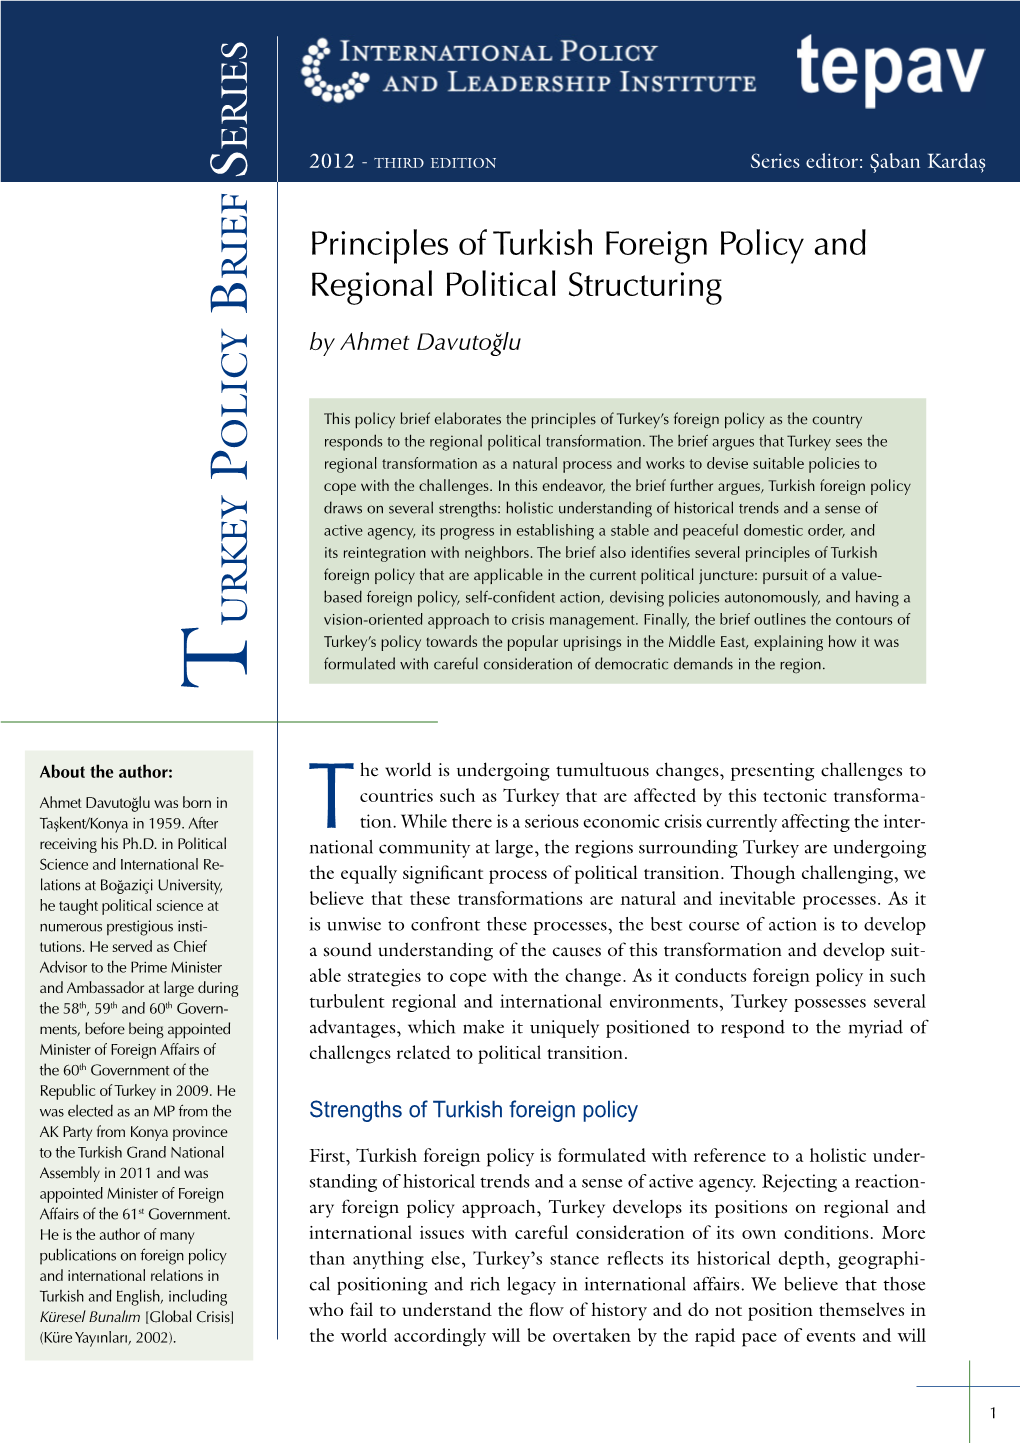 Principles of Turkish Foreign Policy and Regional Political Structuring